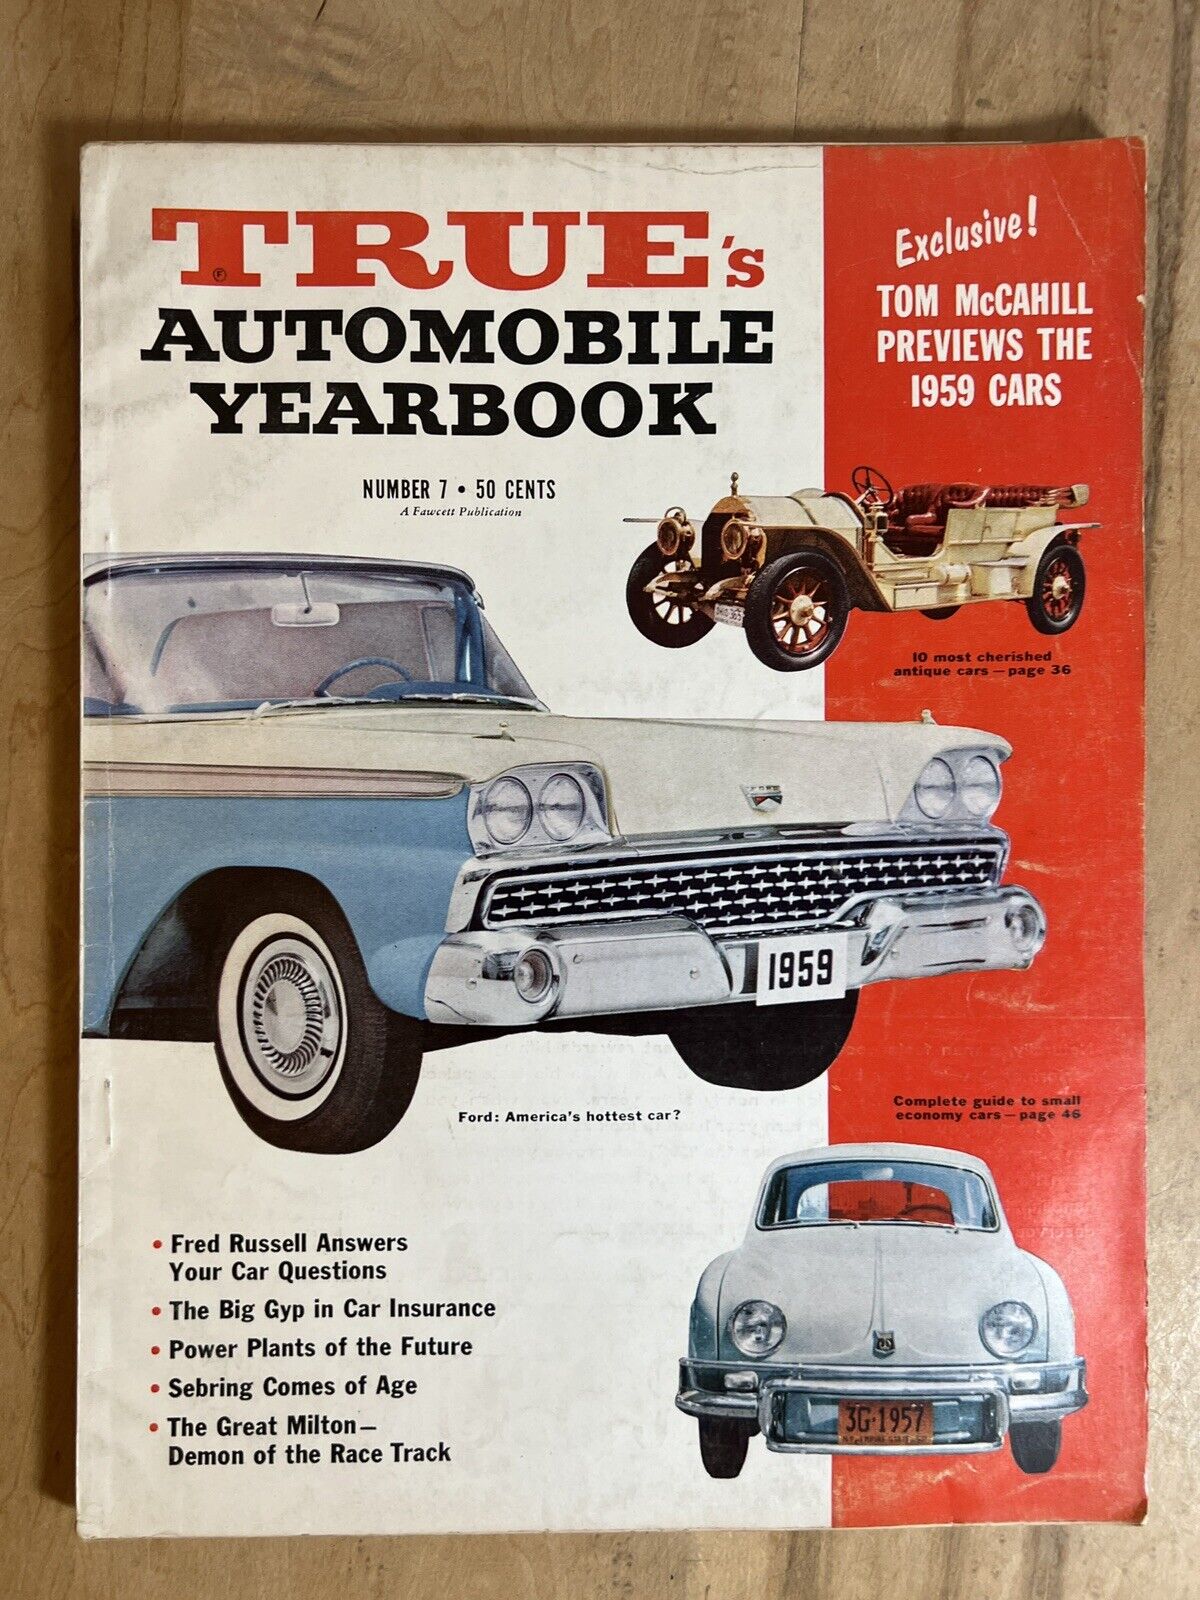 Vintage 1958 TRUE\'S Automobile Yearbook No. 7  Preview of 1959 Cars